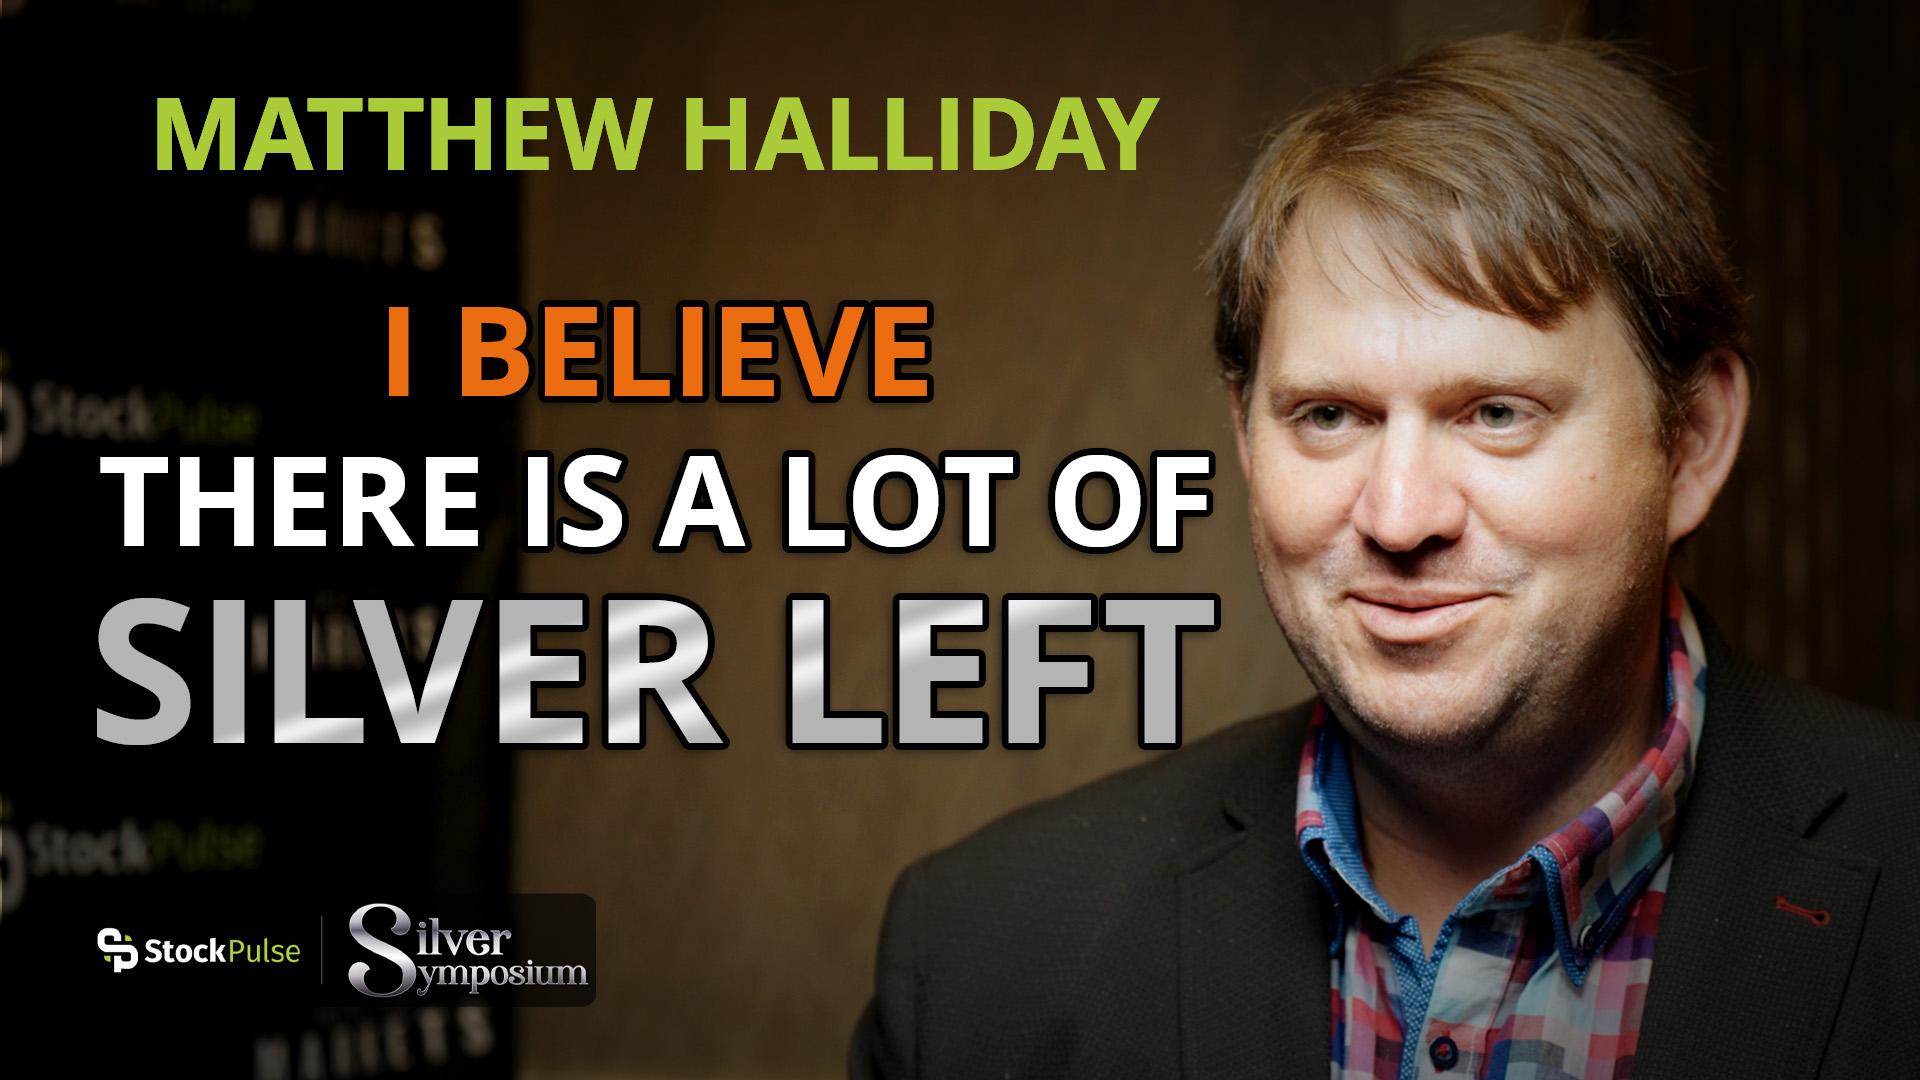 Matthew Halliday: I Believe There is a Lot of Silver Left